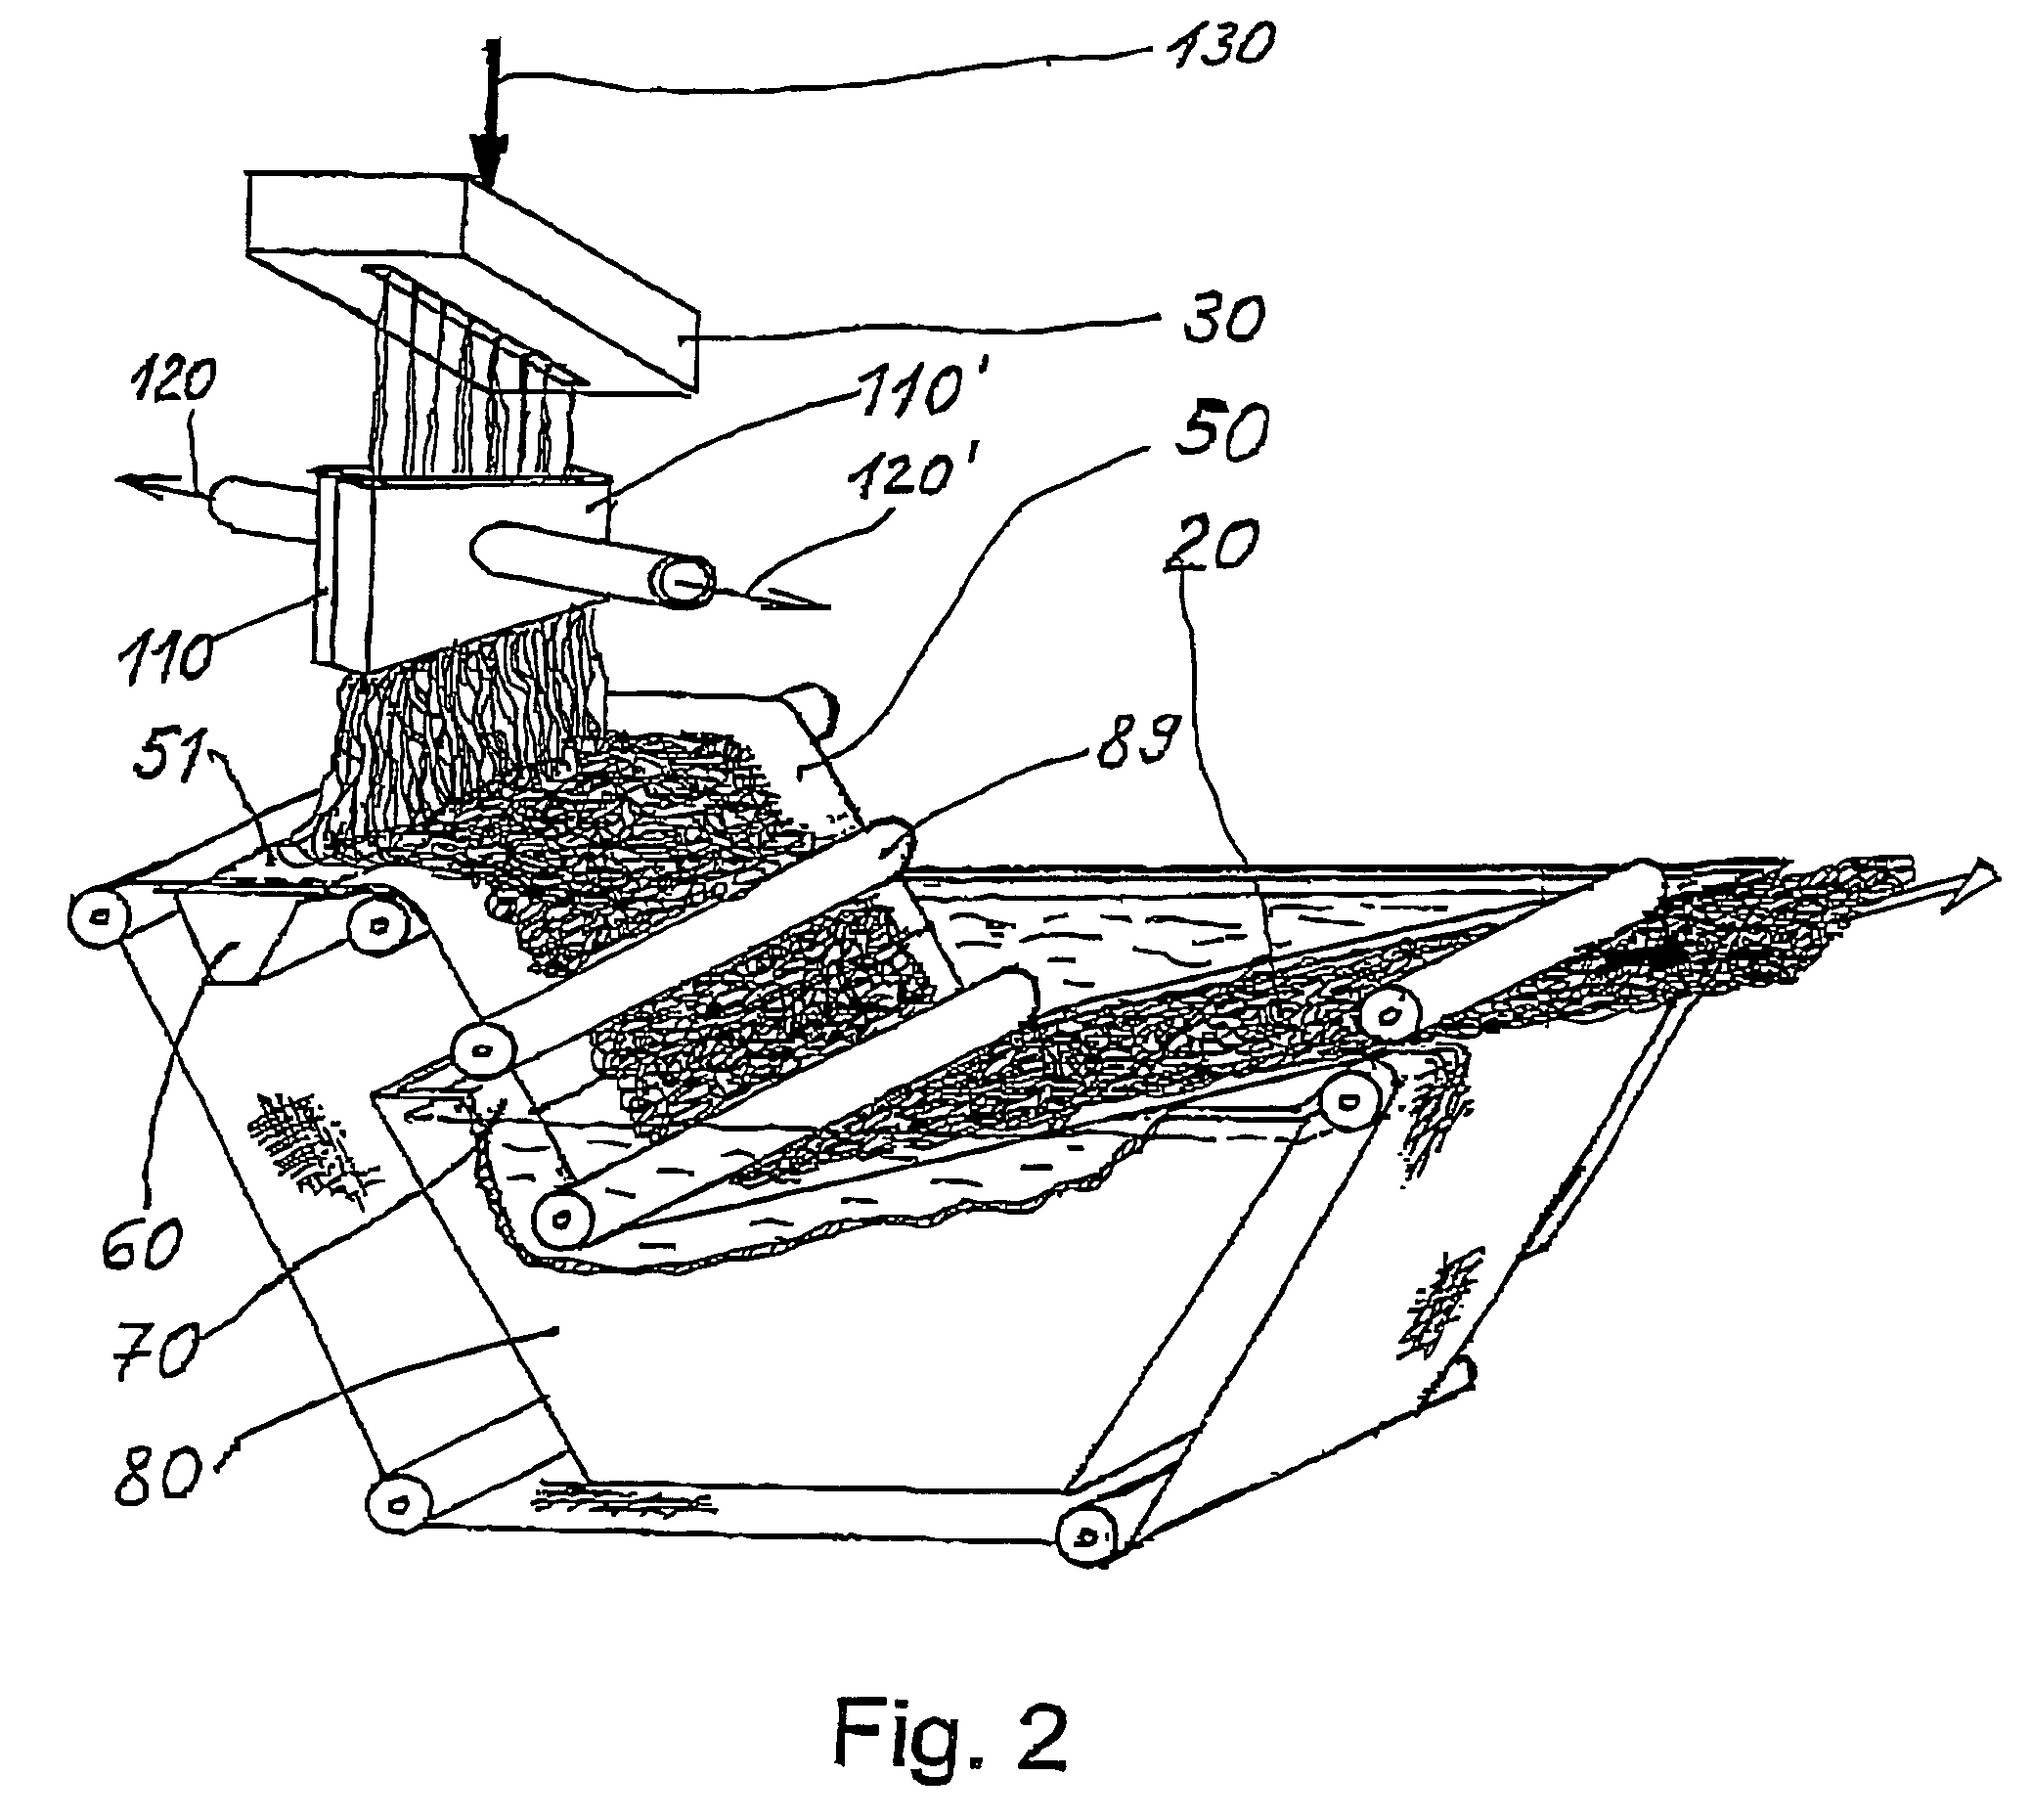 Method and device for producing substantially endless fine threads